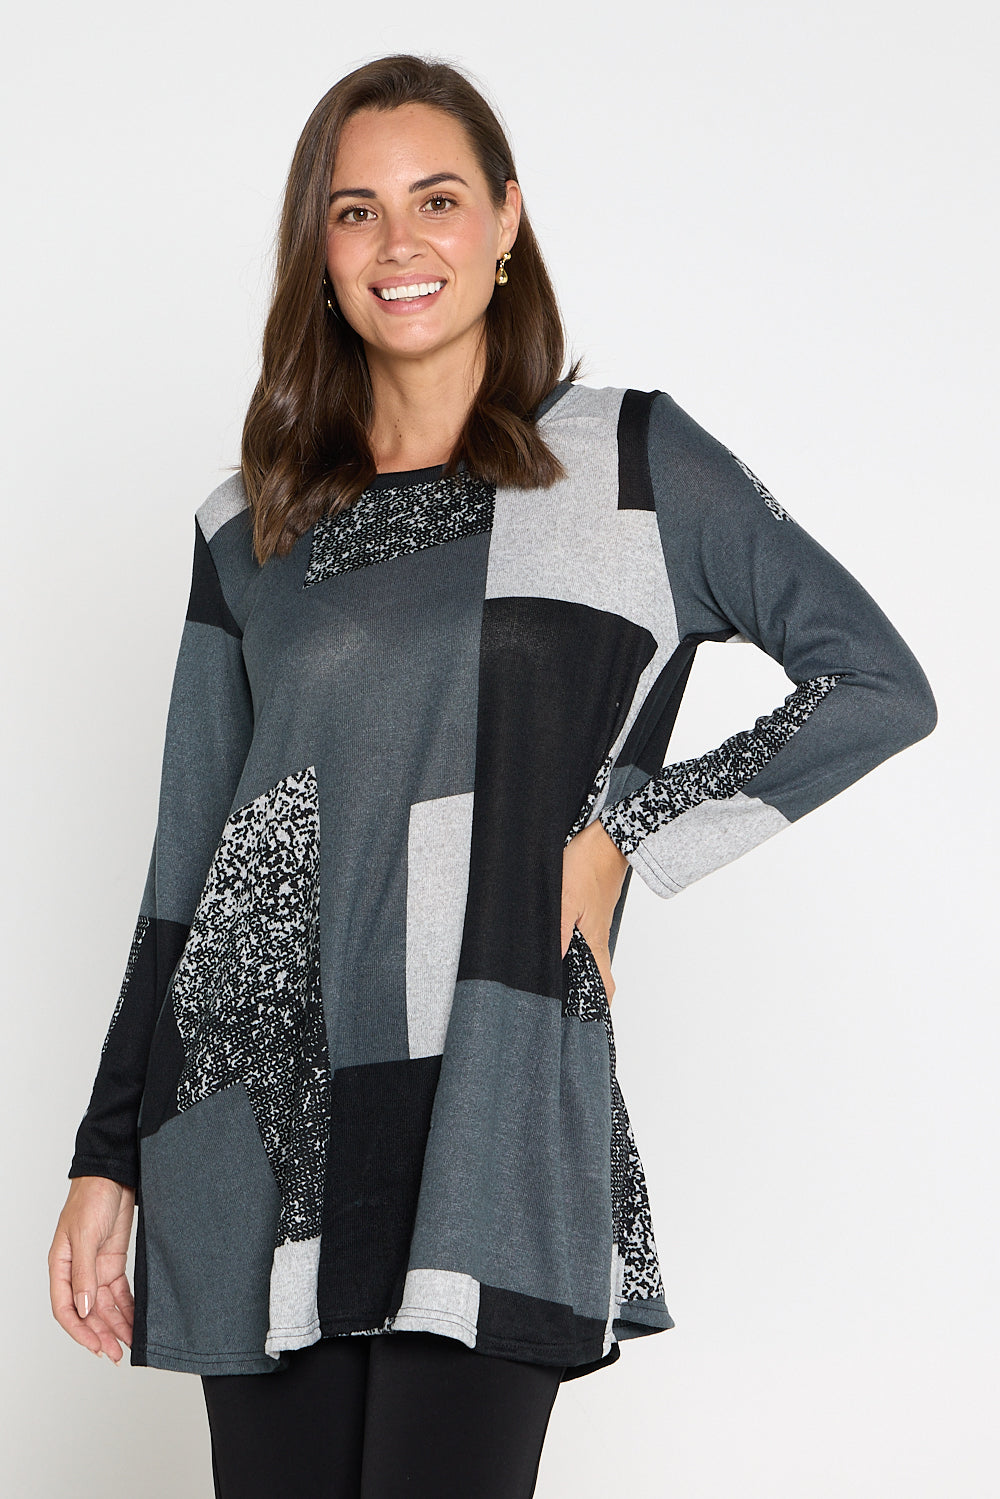 Barb Knit Top - Charcoal Geo Patch